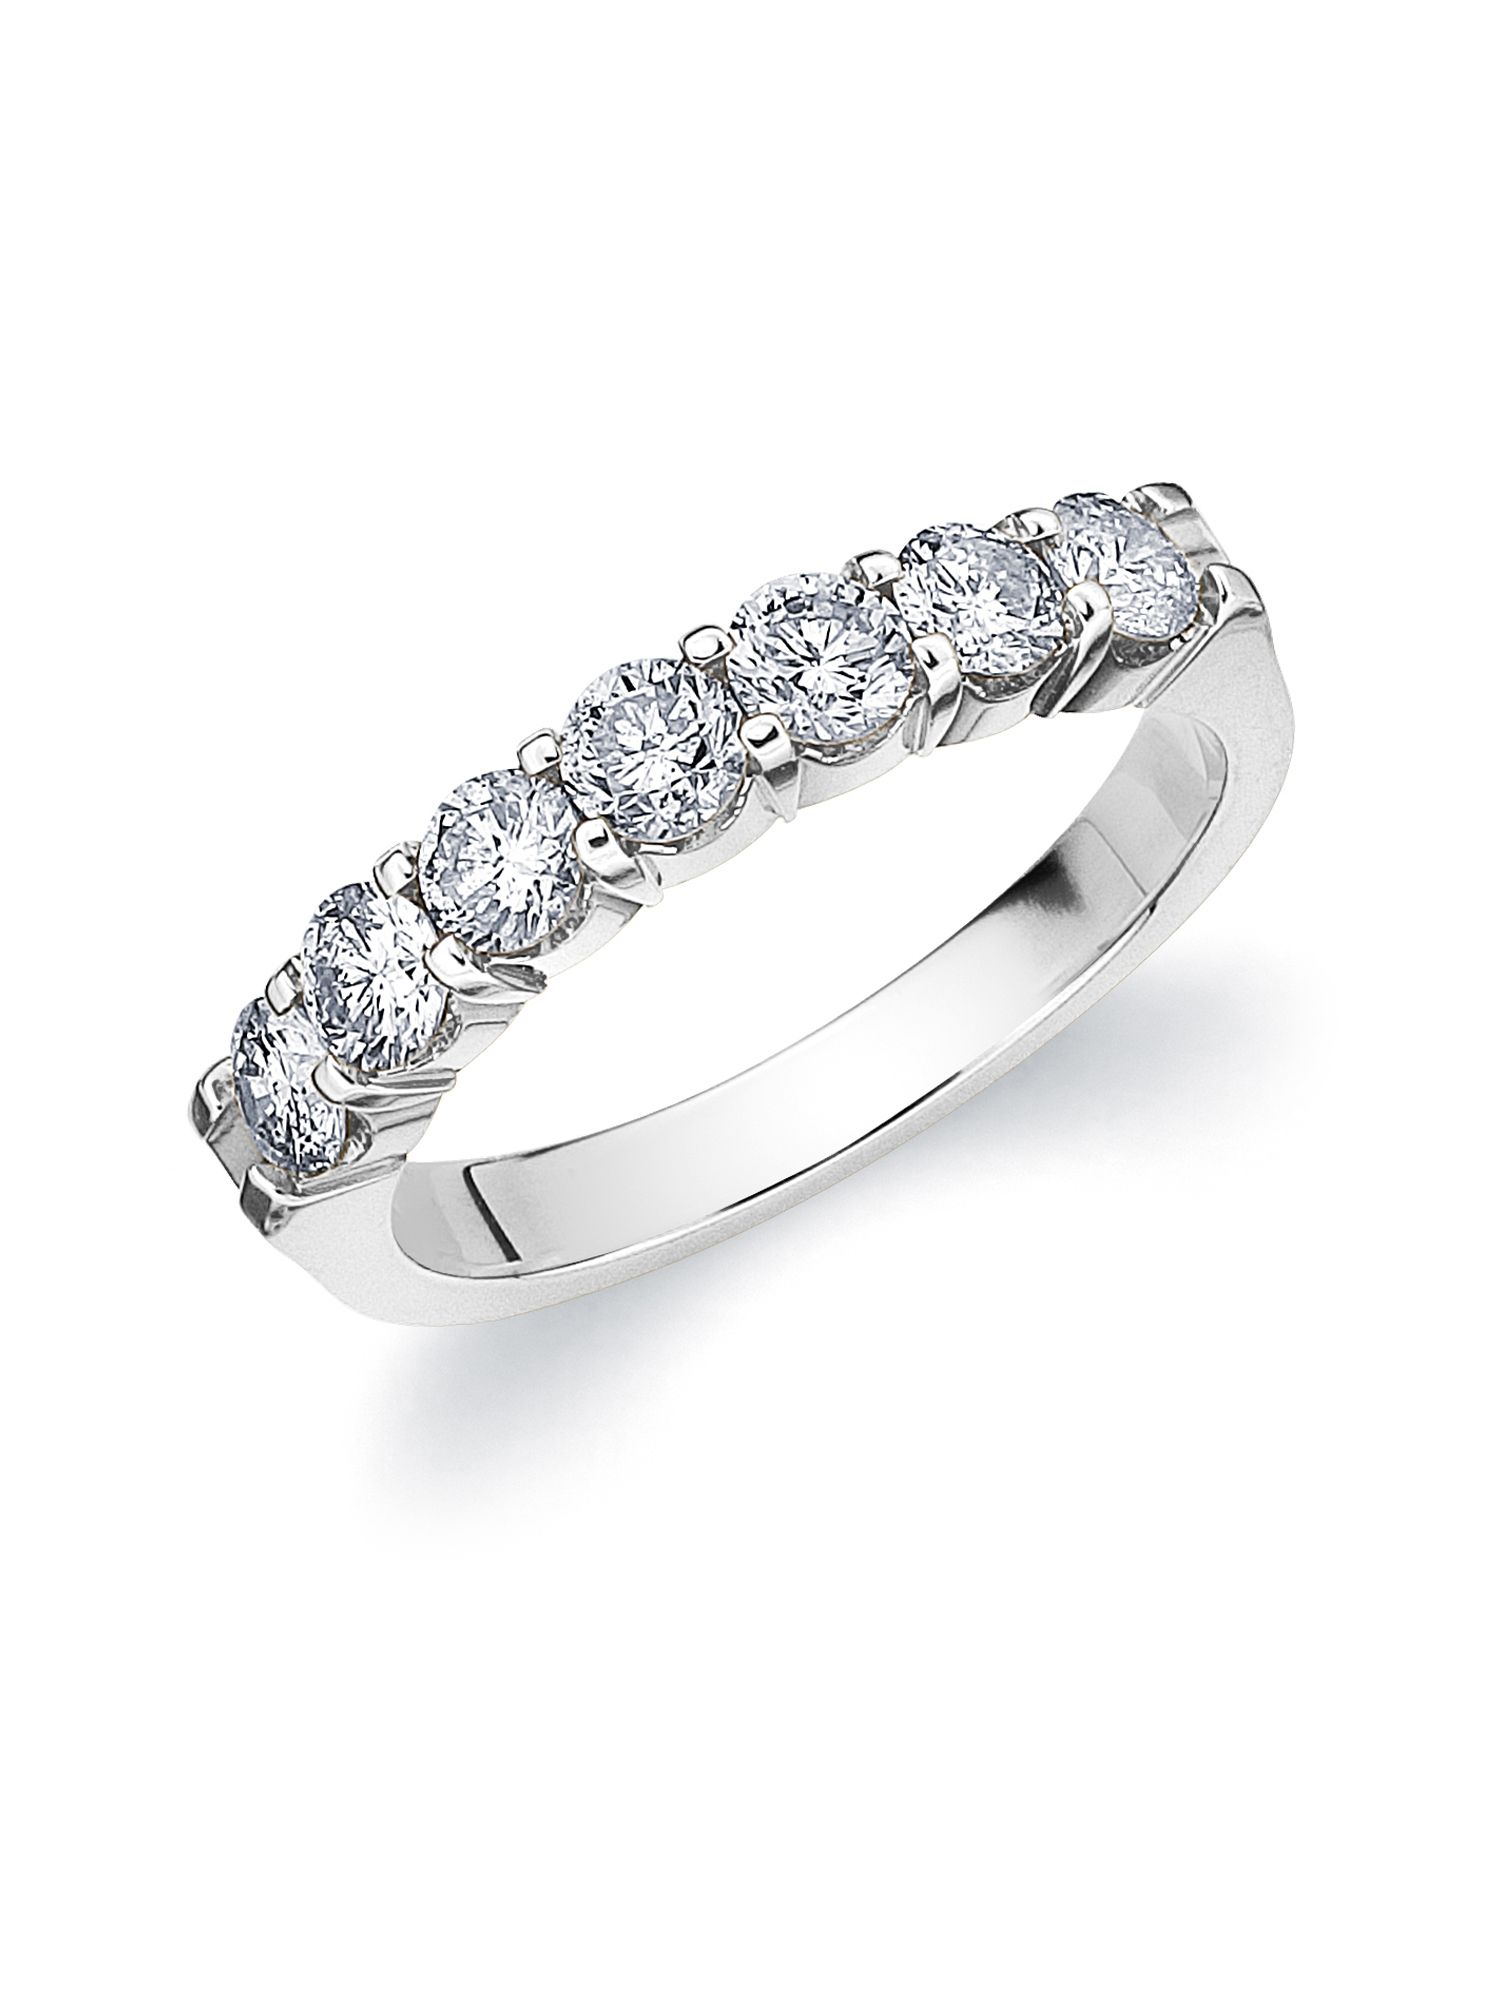 1 Ct Diamond Seven Stones Wedding Band, White Gold Diamond Anniversary Ring Intended For Newest Diamond Seven Stone Anniversary Ring In White Gold (View 16 of 25)